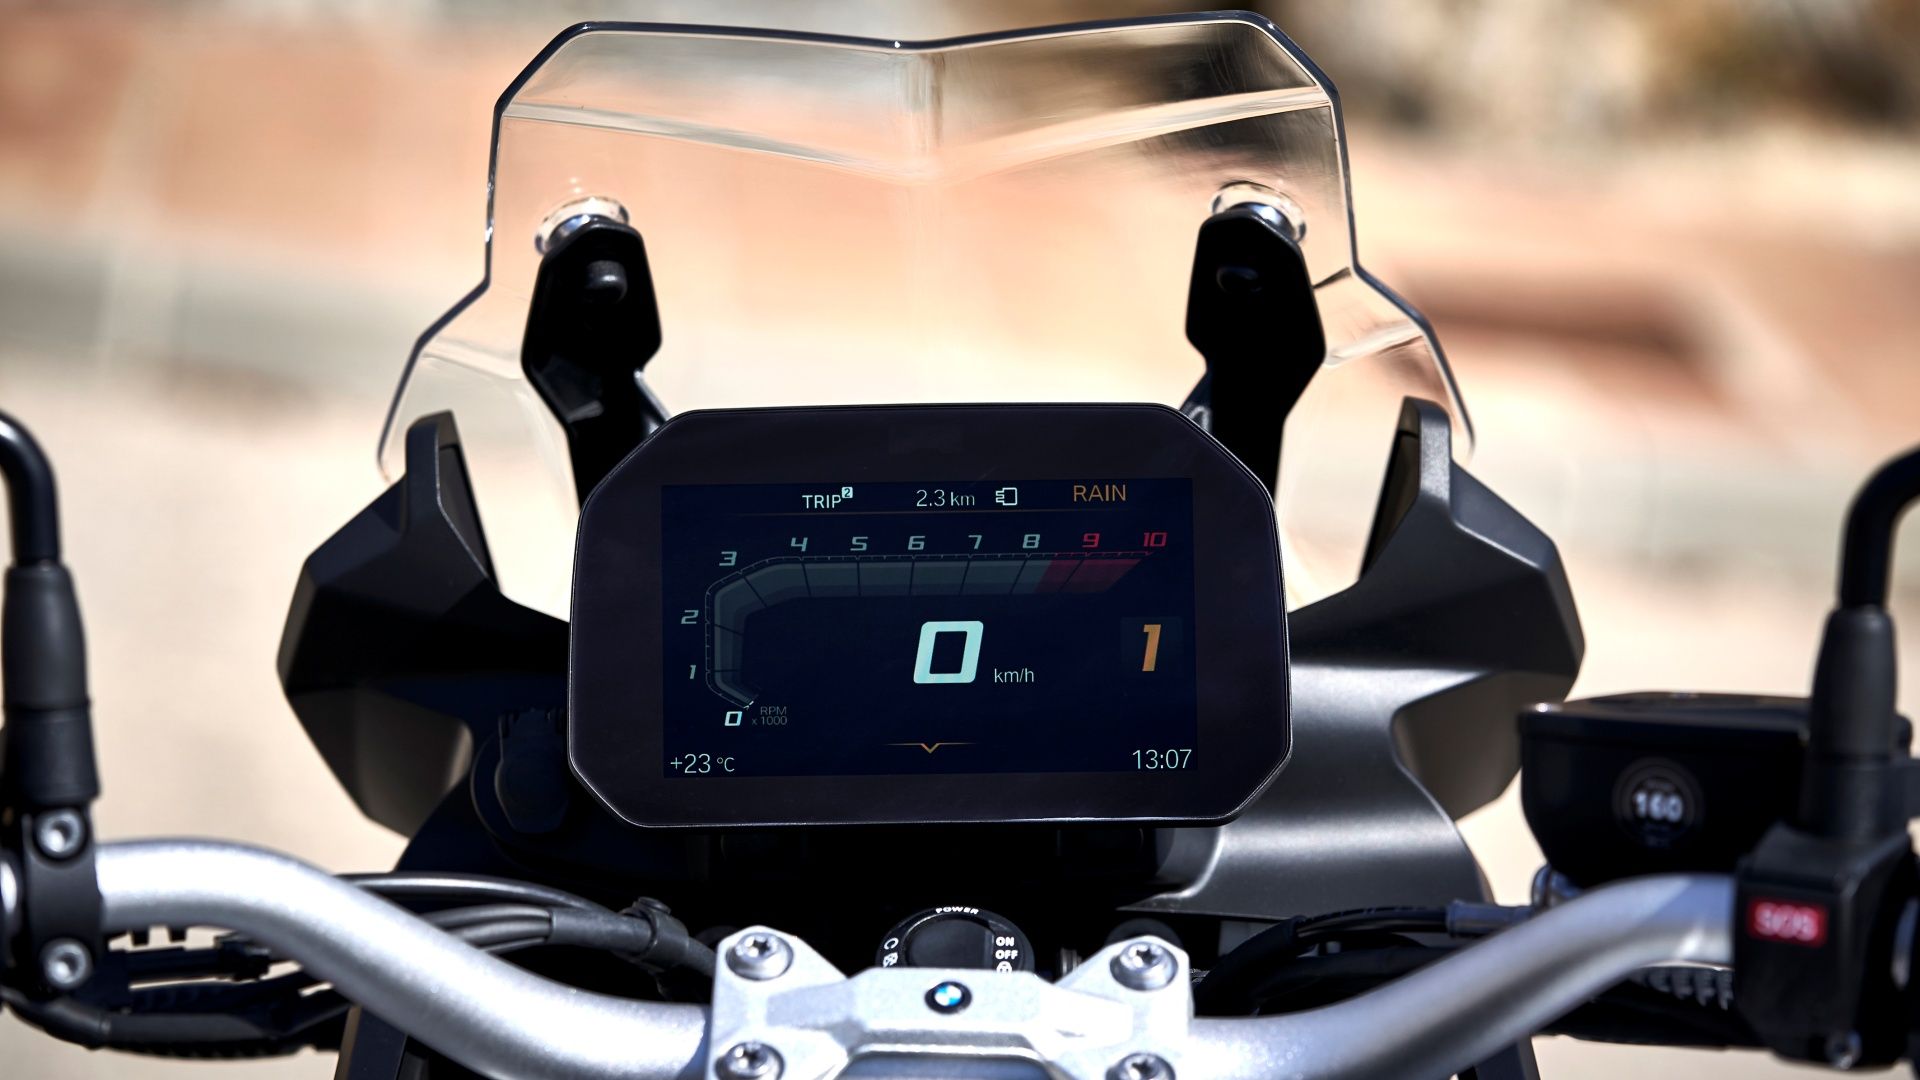 A shot of the TFT color display of a BWM R 850 GS